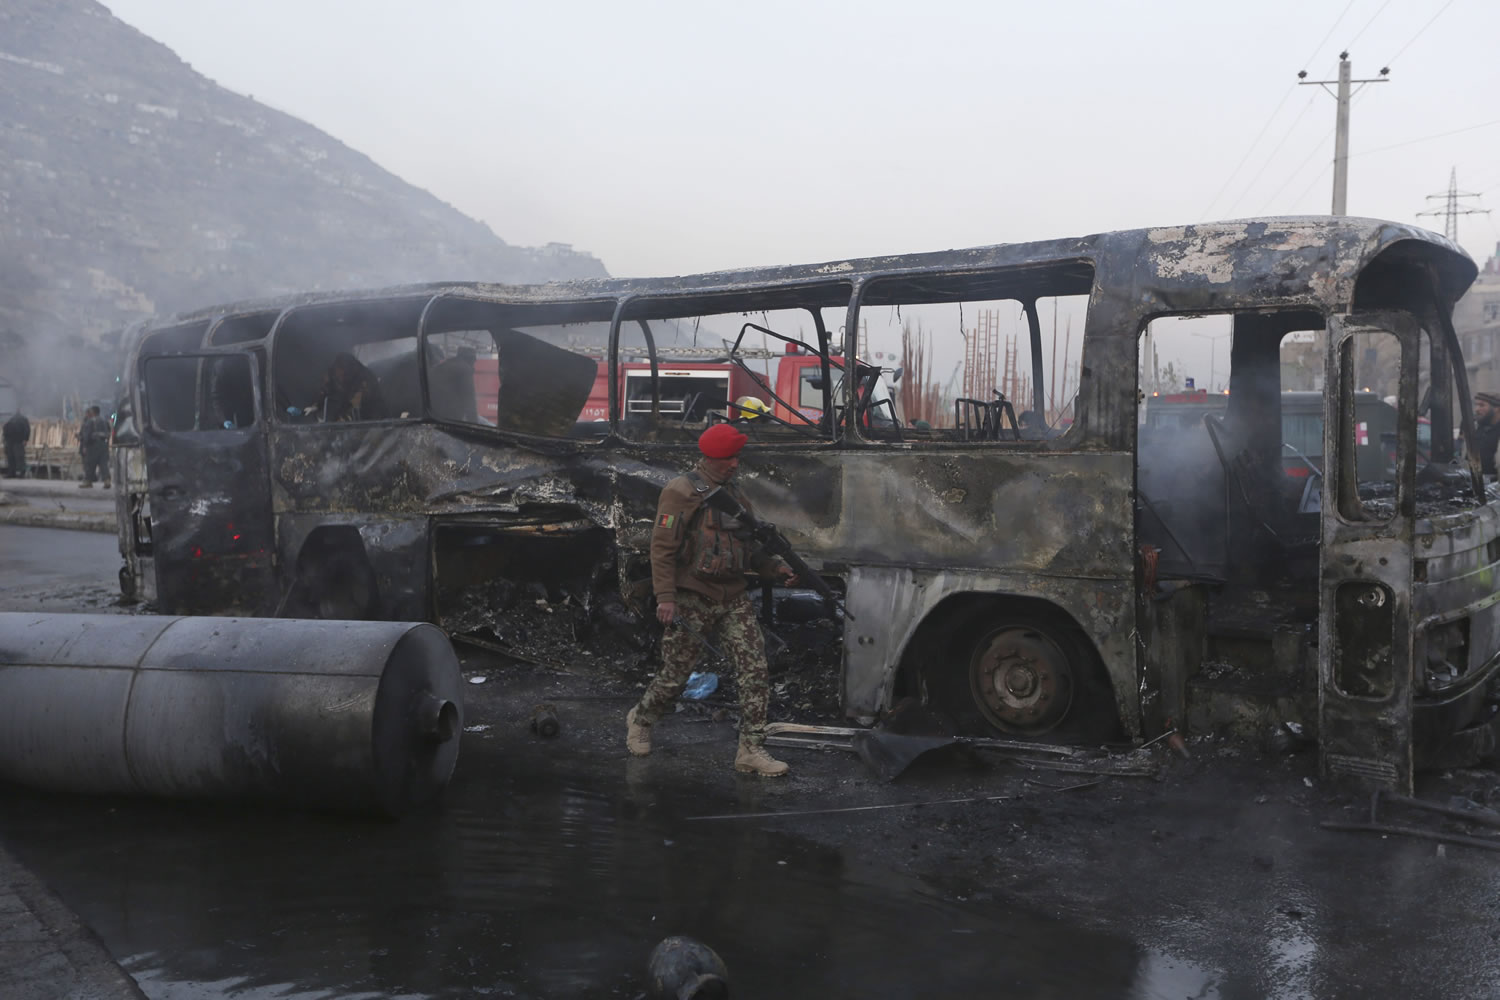 An Afghan soldier inspects a damaged bus Dec. 13 at the site of a suicide attack by the Taliban in Kabul, Afghanistan. With U.S.-led forces shifting to a supporting role at the end of this month, Afghanistan will have to chart its own course after the country's bloodiest year since the 2001 invasion, a year which saw record casualties among Afghan civilians and security forces alike.